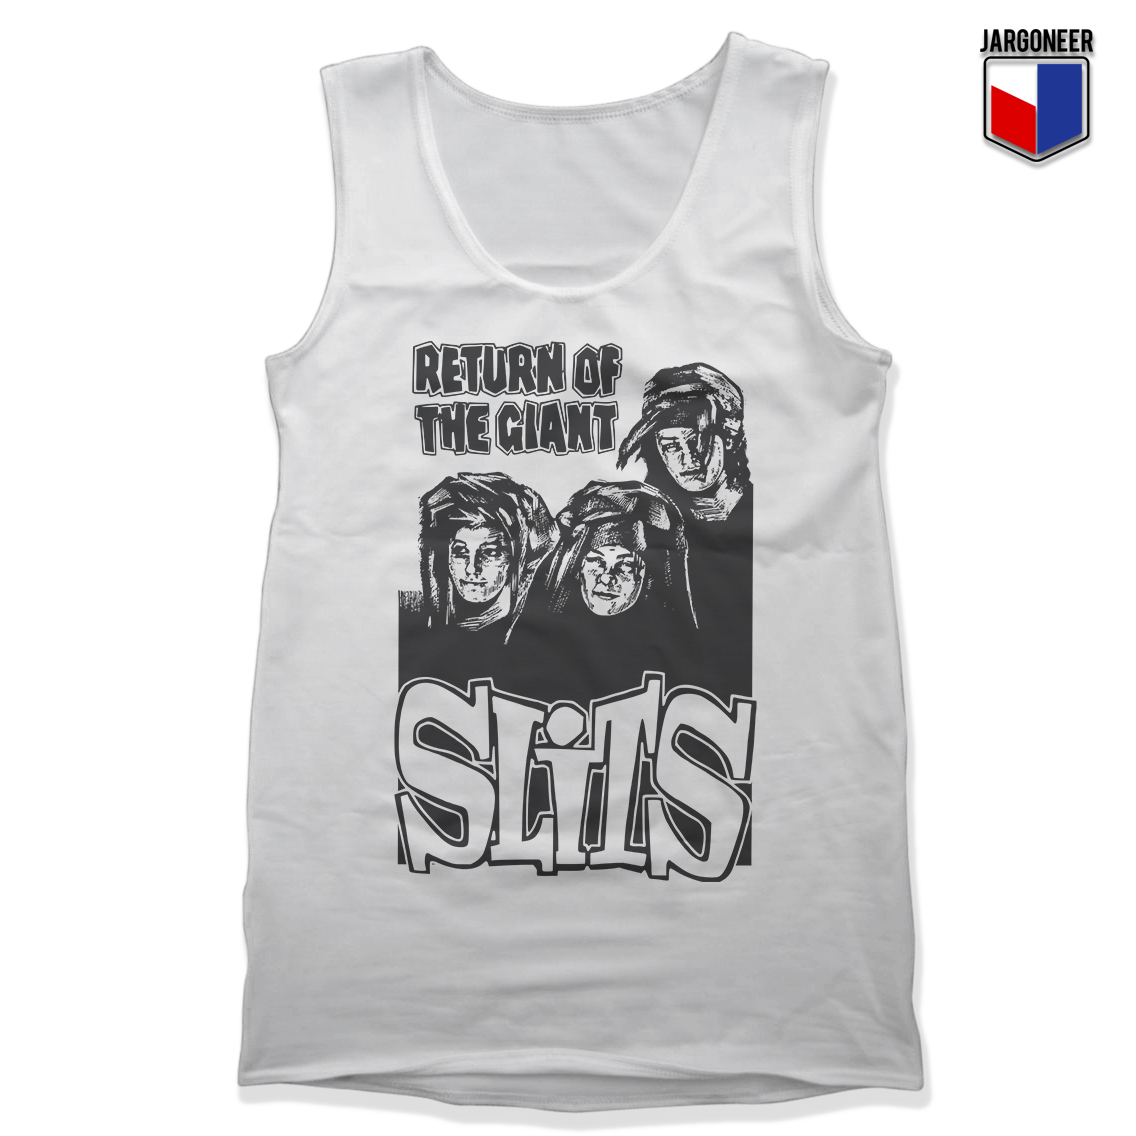 The Slits Return Of The Giant White Tank - Shop Unique Graphic Cool Shirt Designs